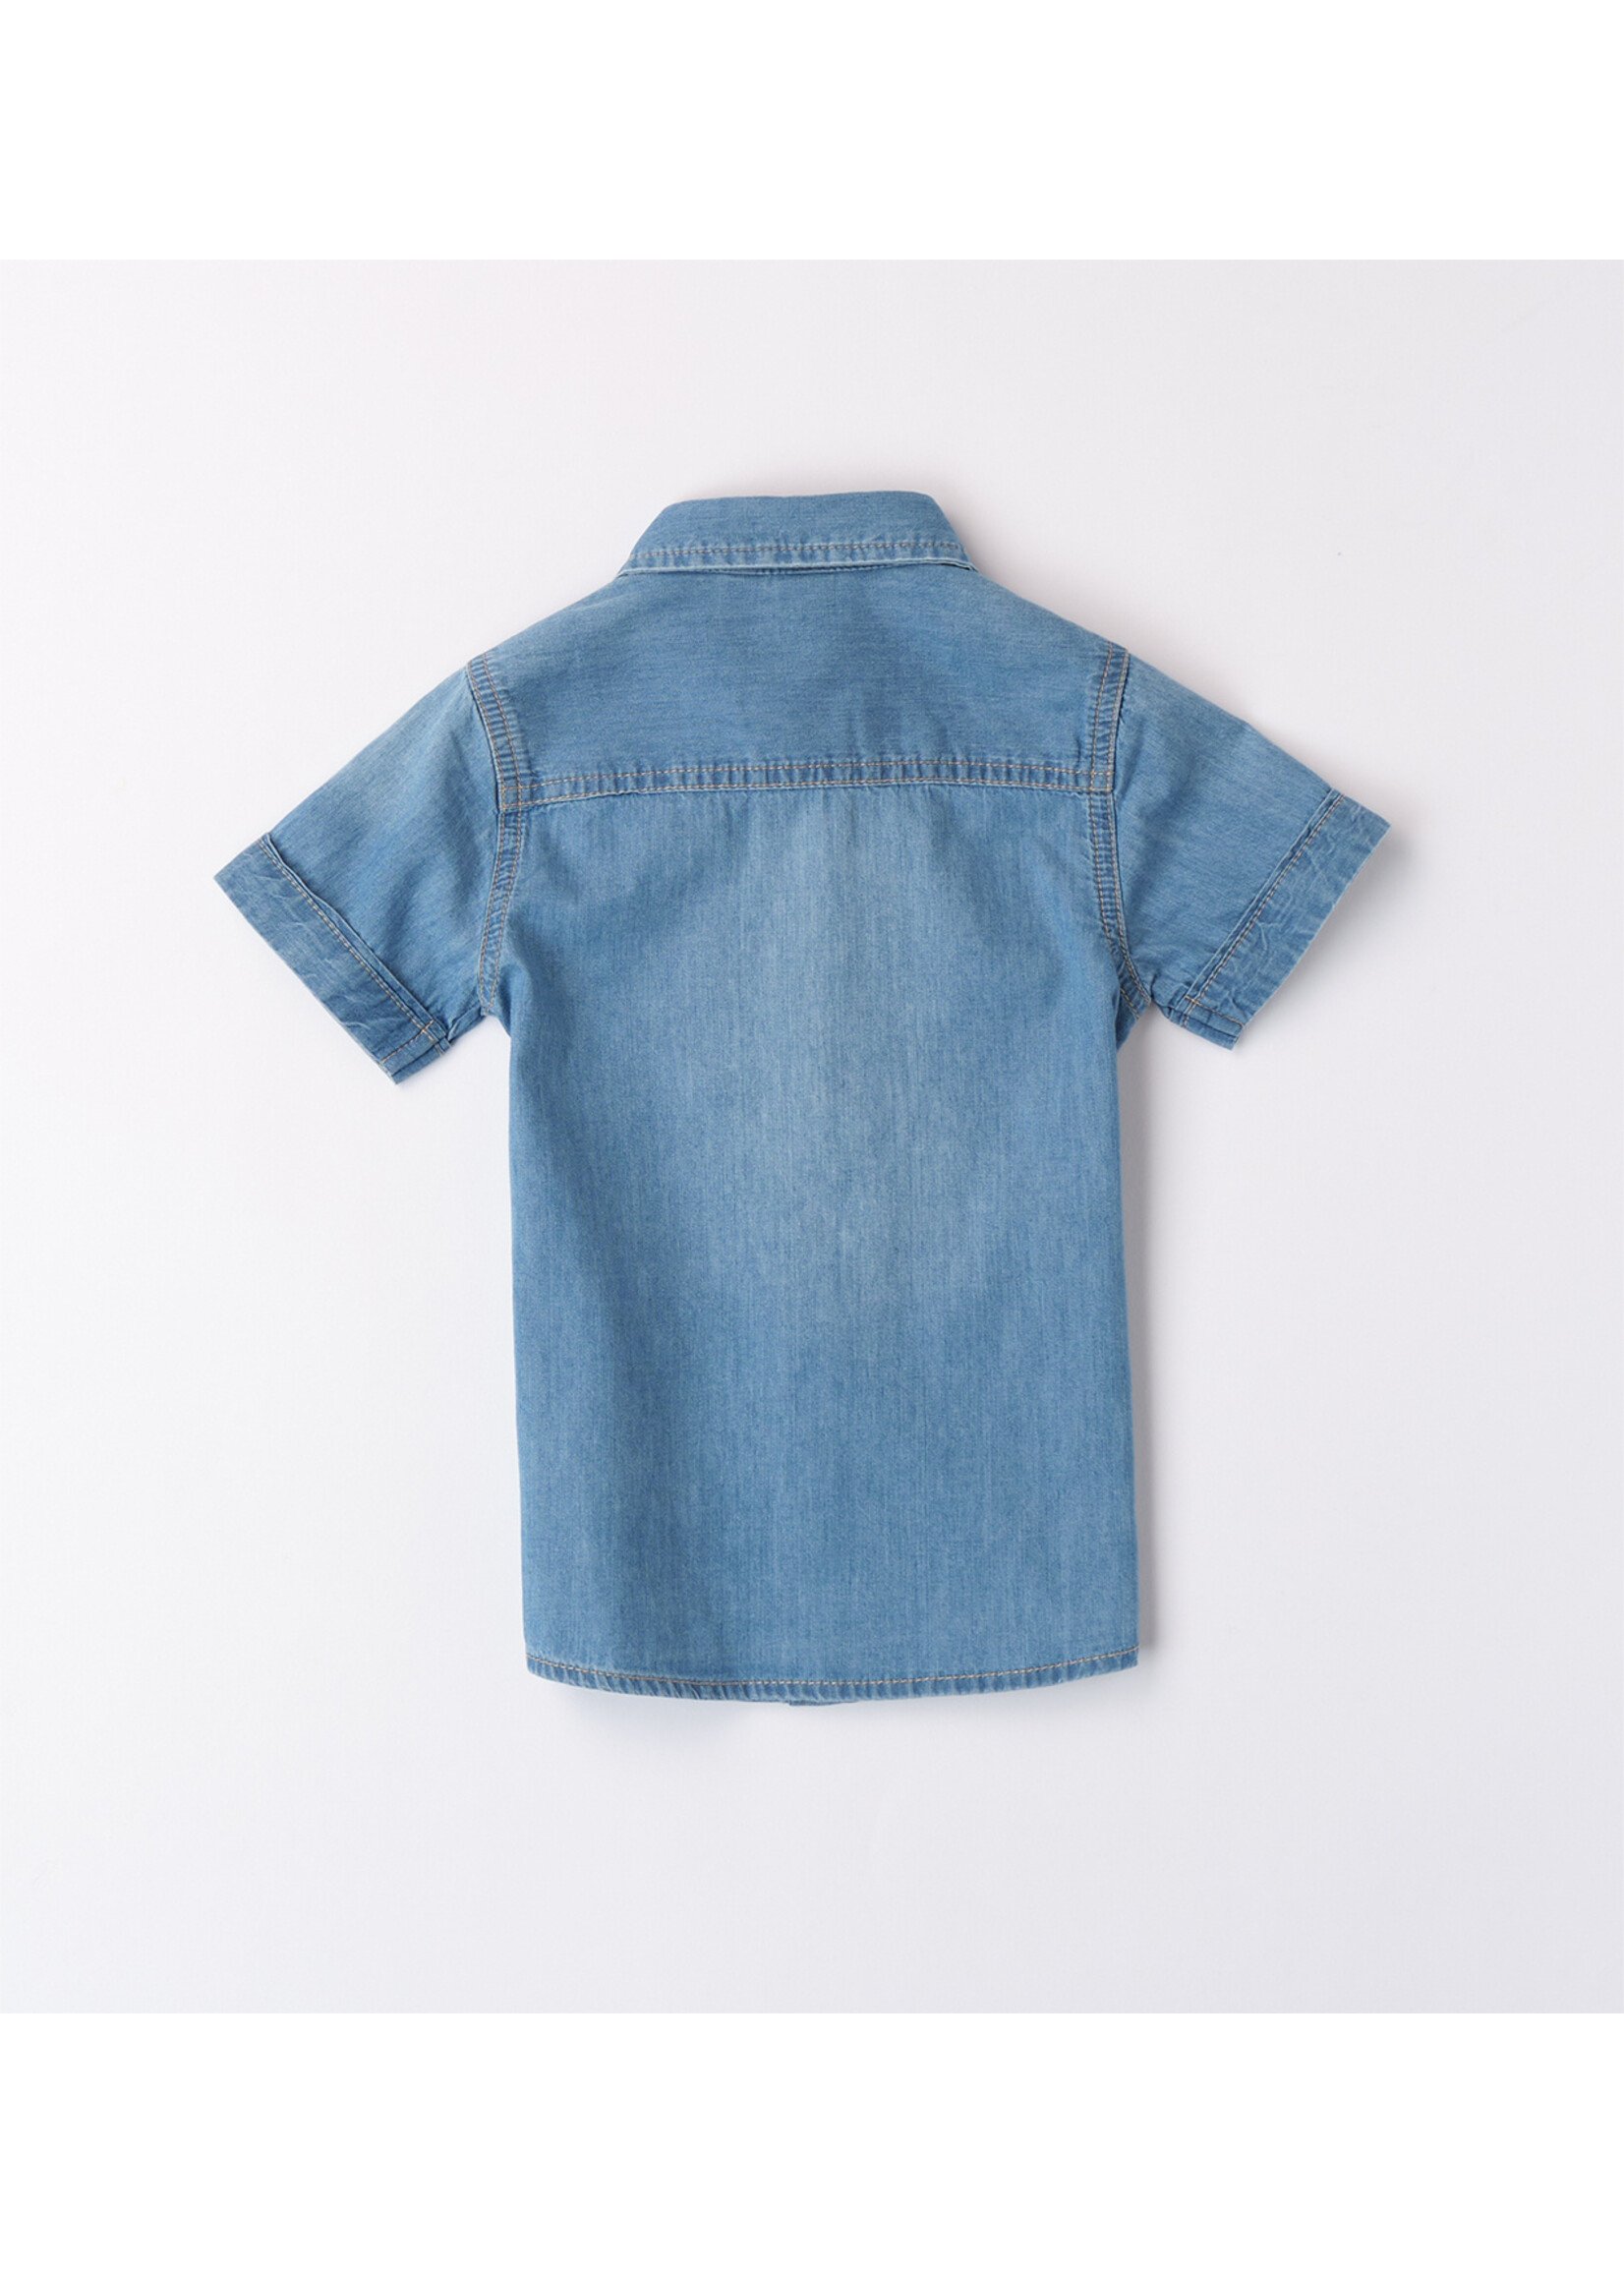 Ido 48238 SHORT SLEEVED SHIRT CLEAR WASHED